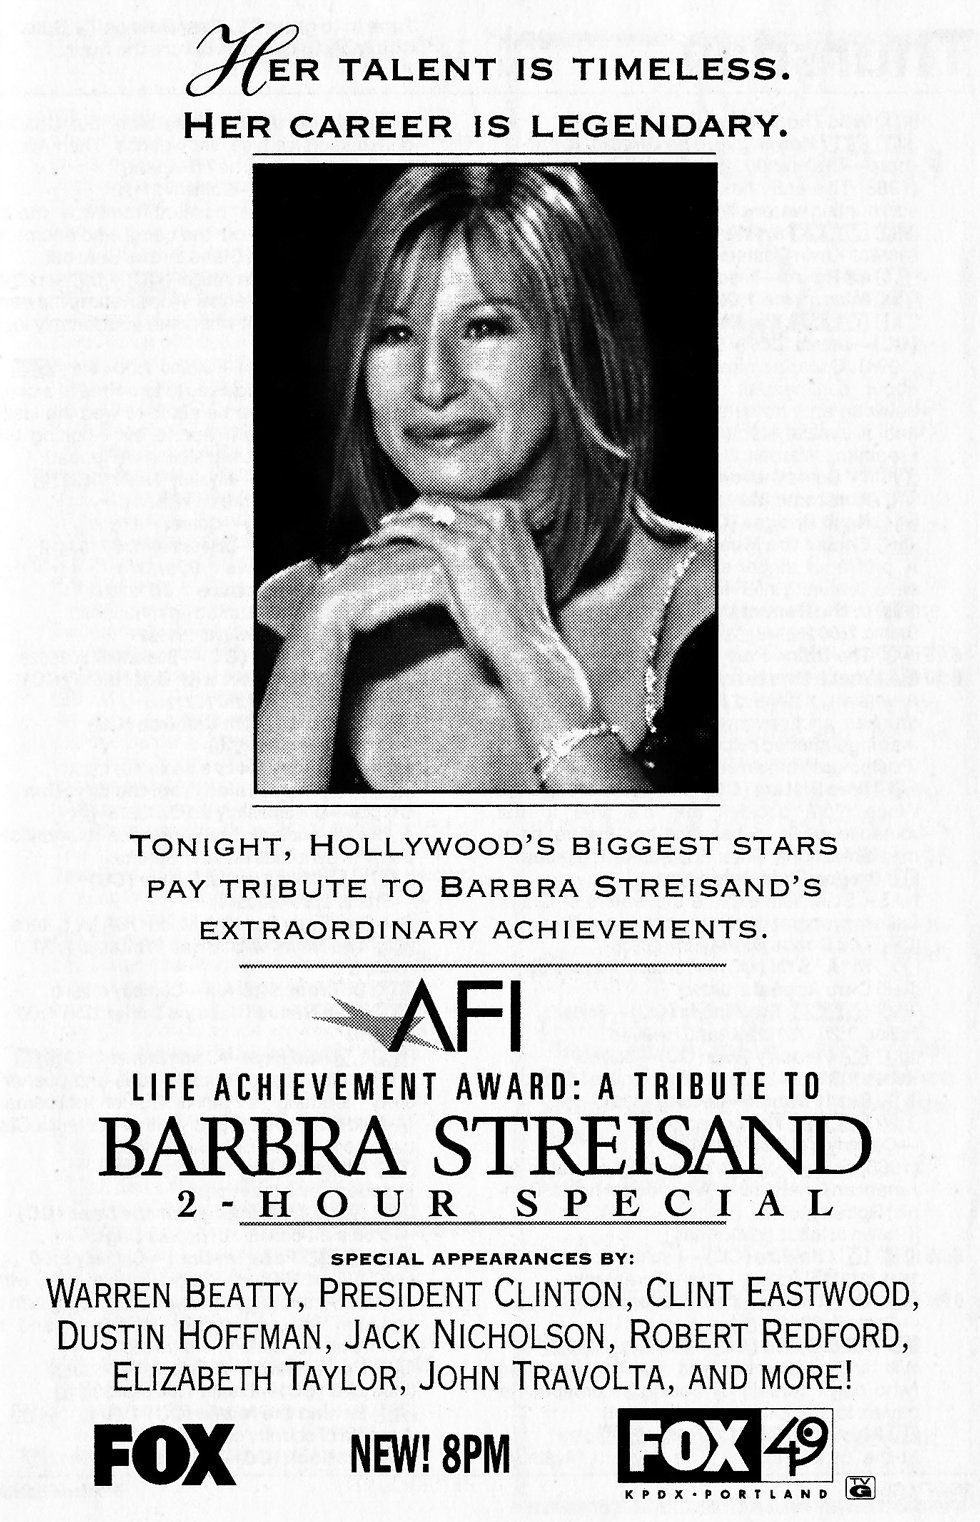 TV guide ad for the AFI Life Achievement Award TV show.